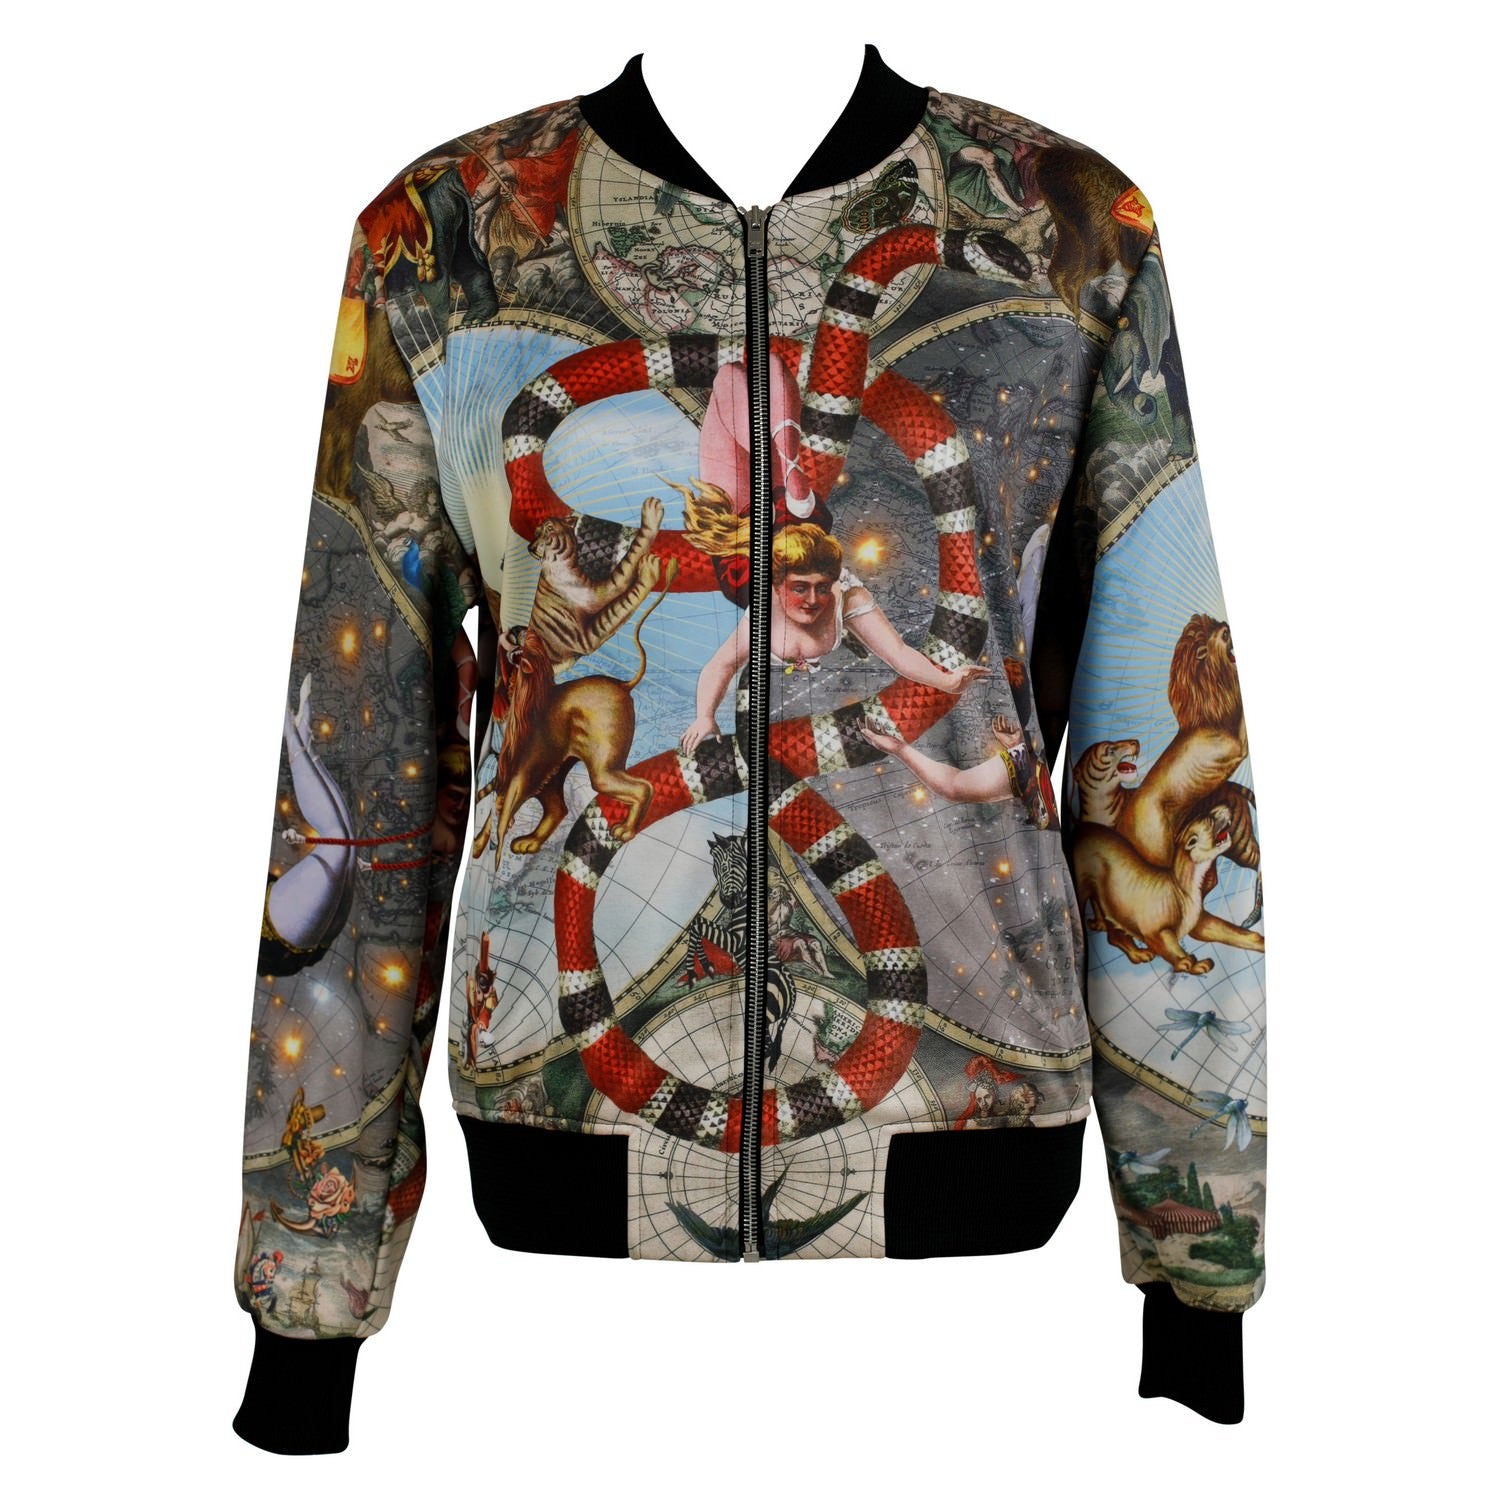 Luxury softshell bomber jacket in a maximalist Circus inspired design